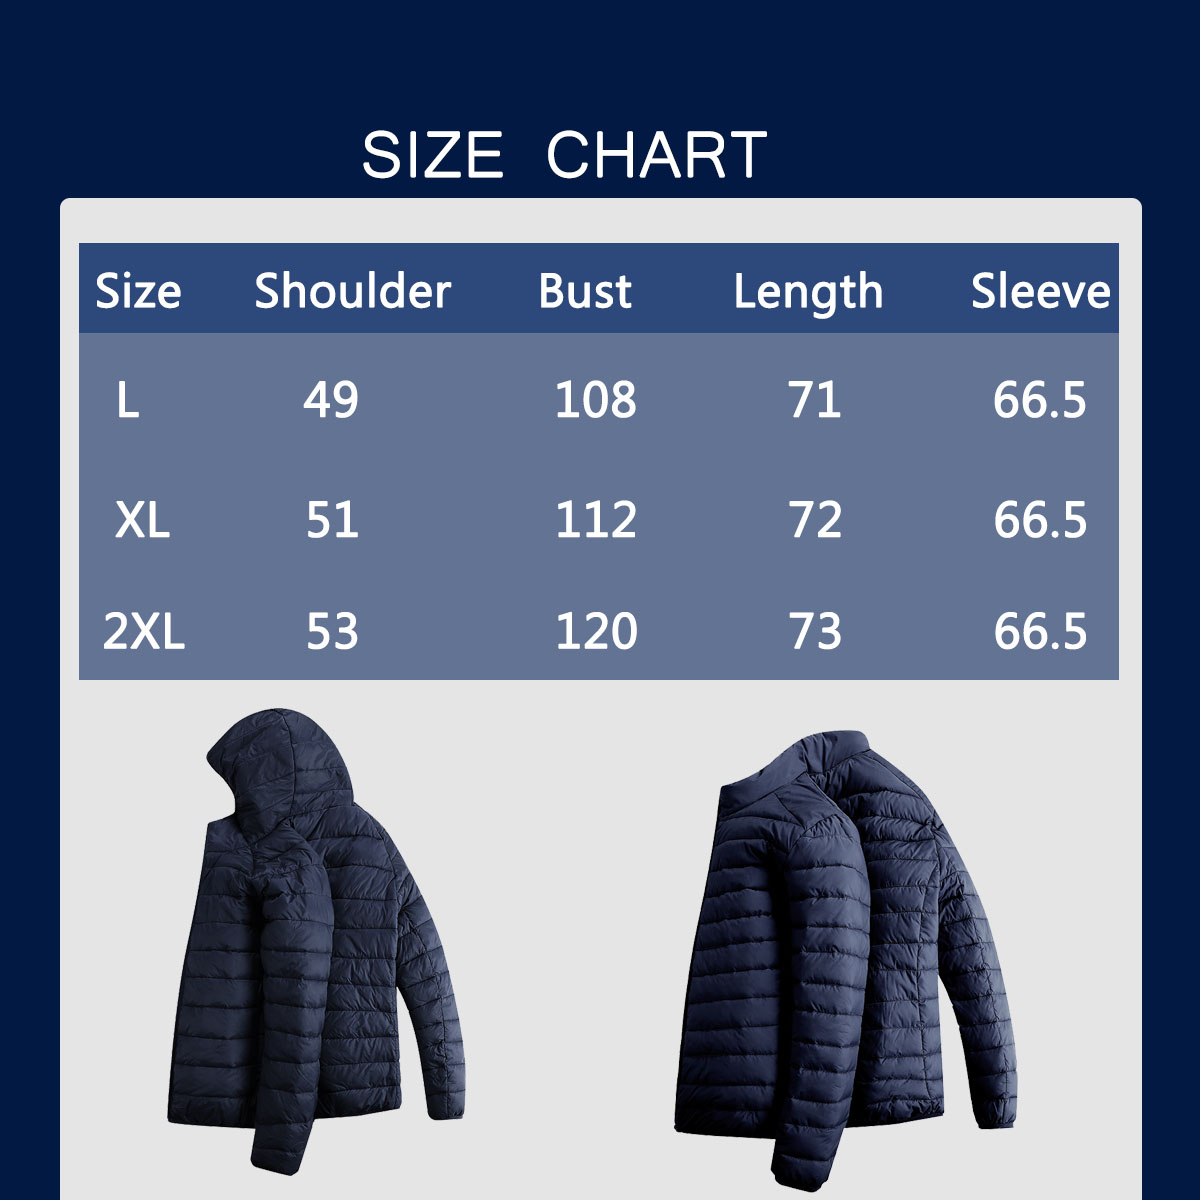 Packable Down Jacket Women Hooded Ultra Light Weight Short Down Coat with Carrying Case - image 2 of 4